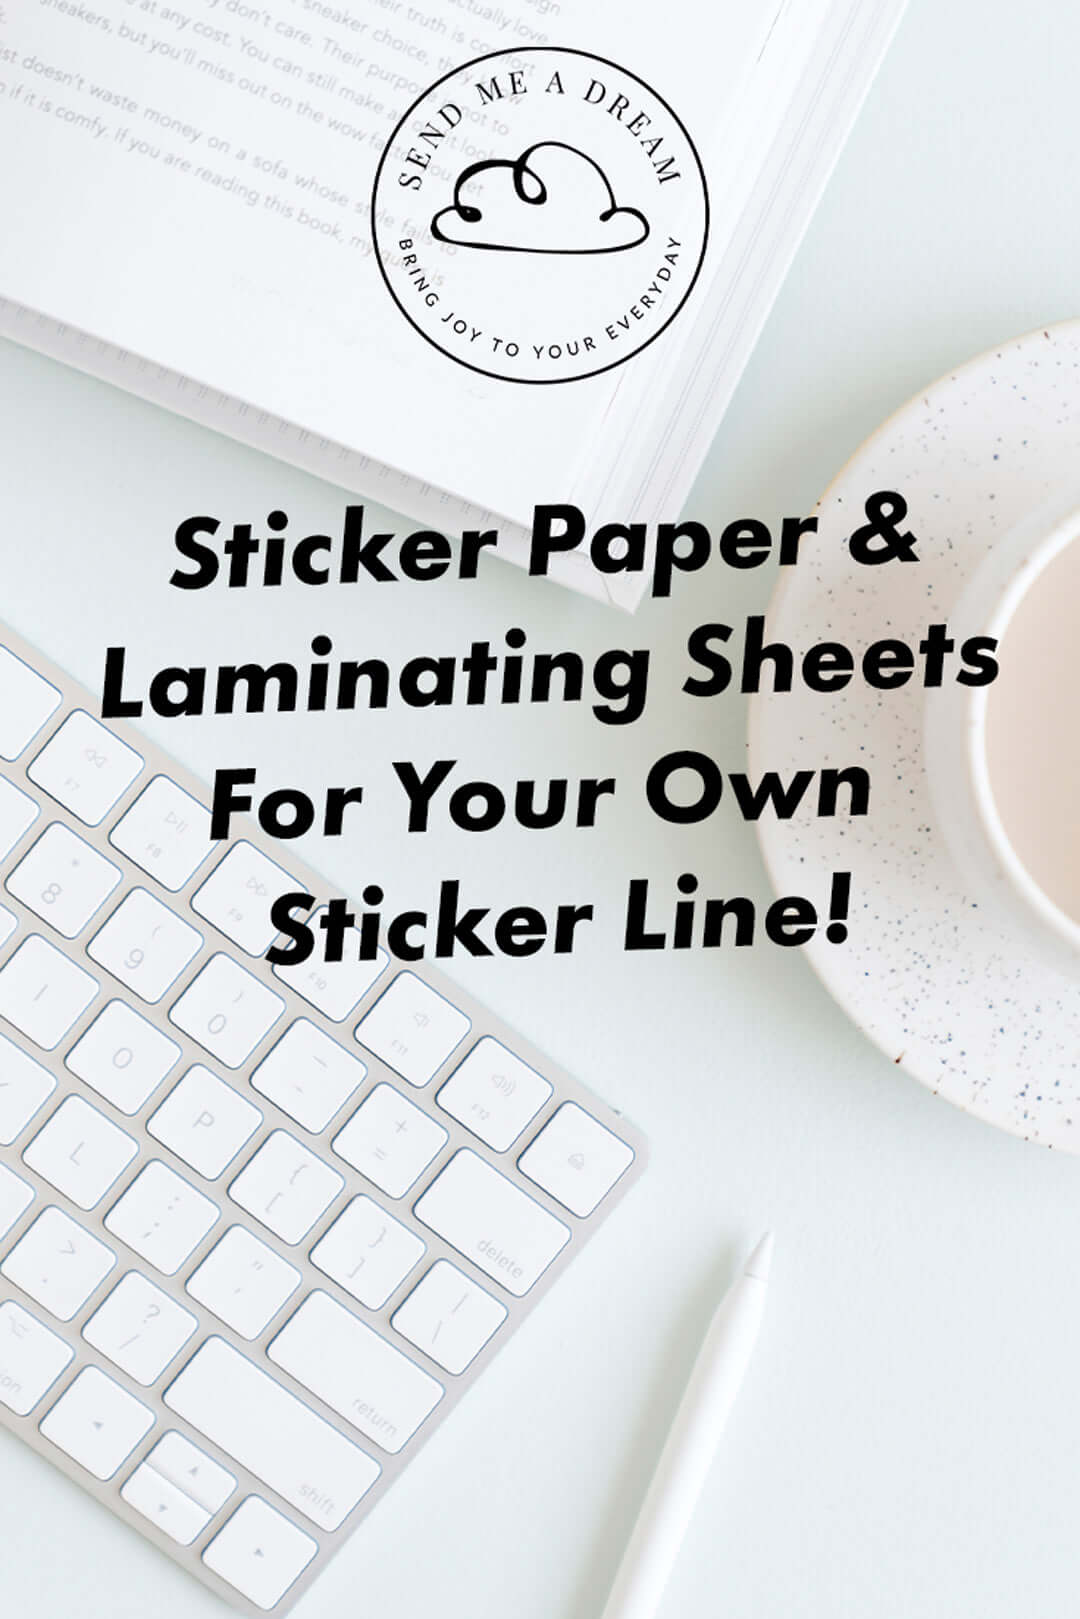 The Best Sticker Paper and Laminating Sheets